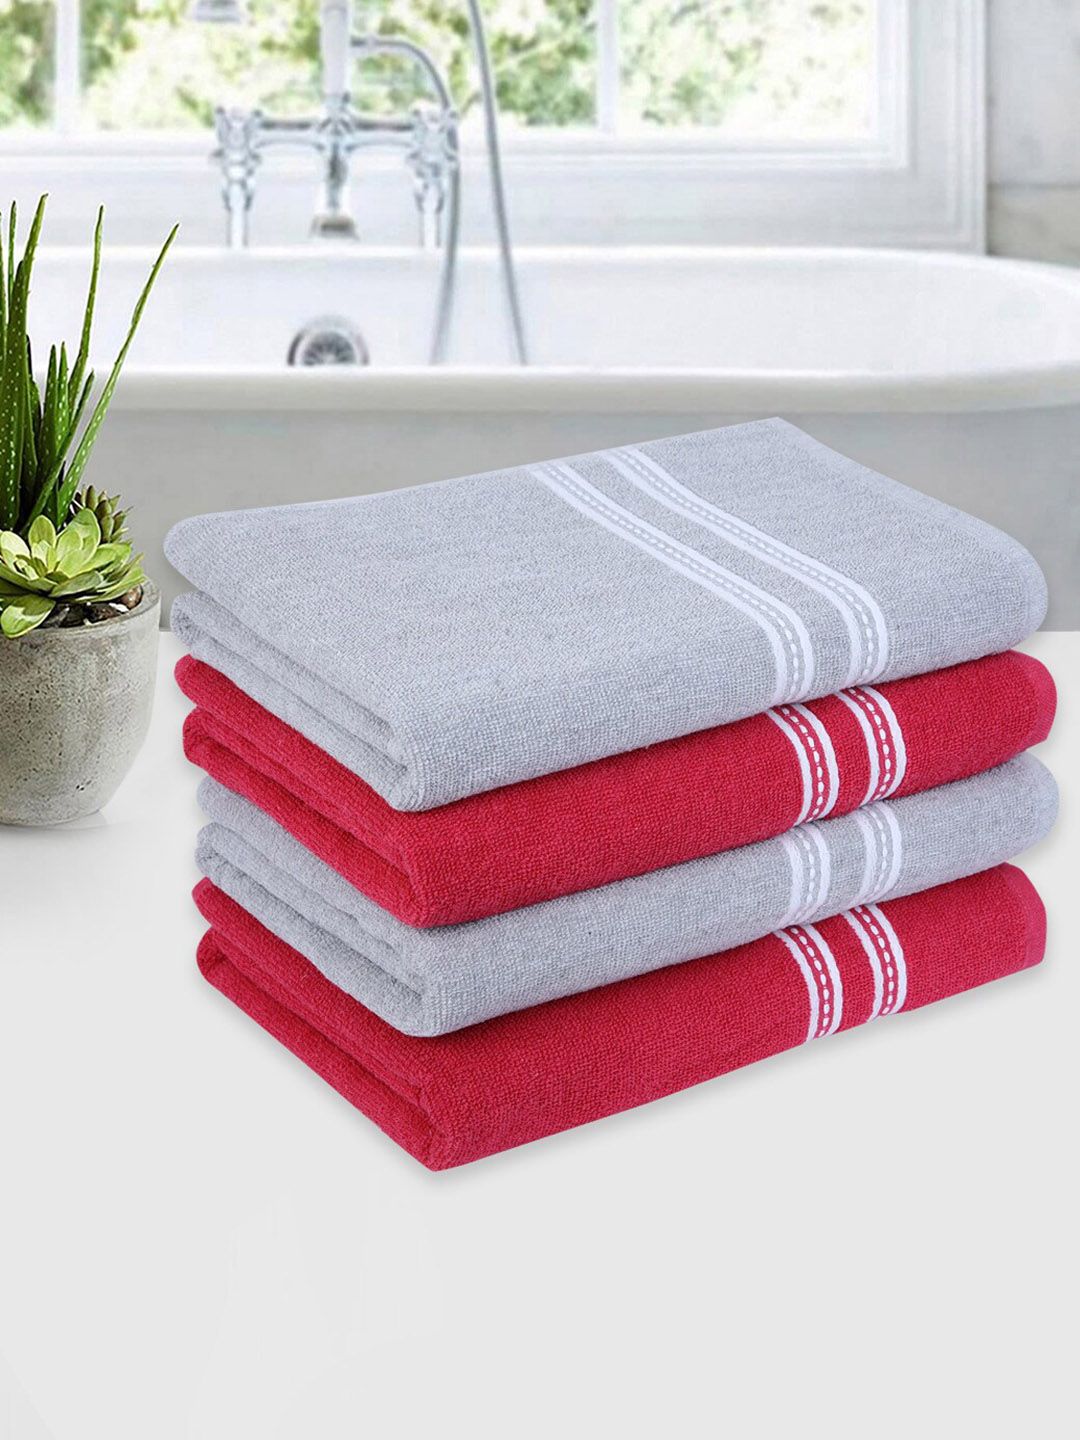 ROMEE Set Of 4 Pink & Silver Solid 500 GSM Cotton Bath Towels Price in India